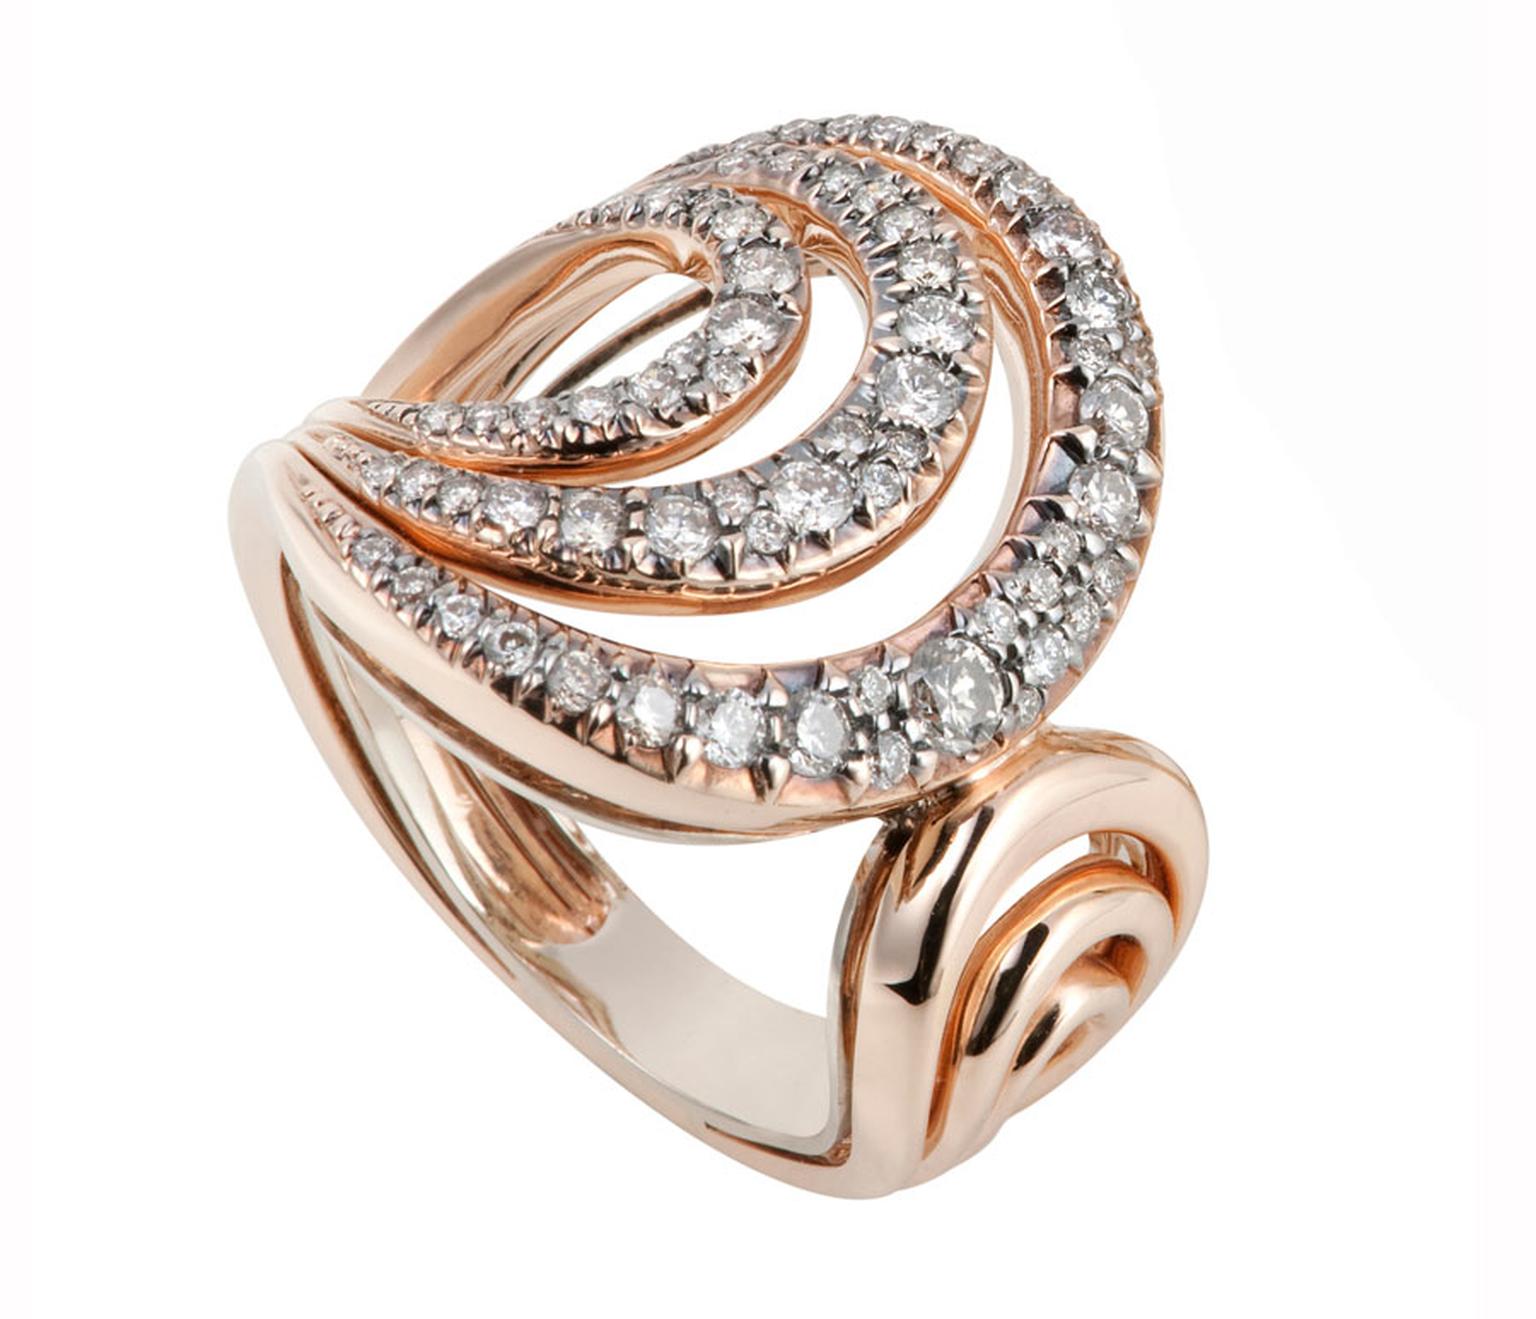 H-Stern-Ring-in-rose-and-Noble-Gold-with-diamonds.jpg